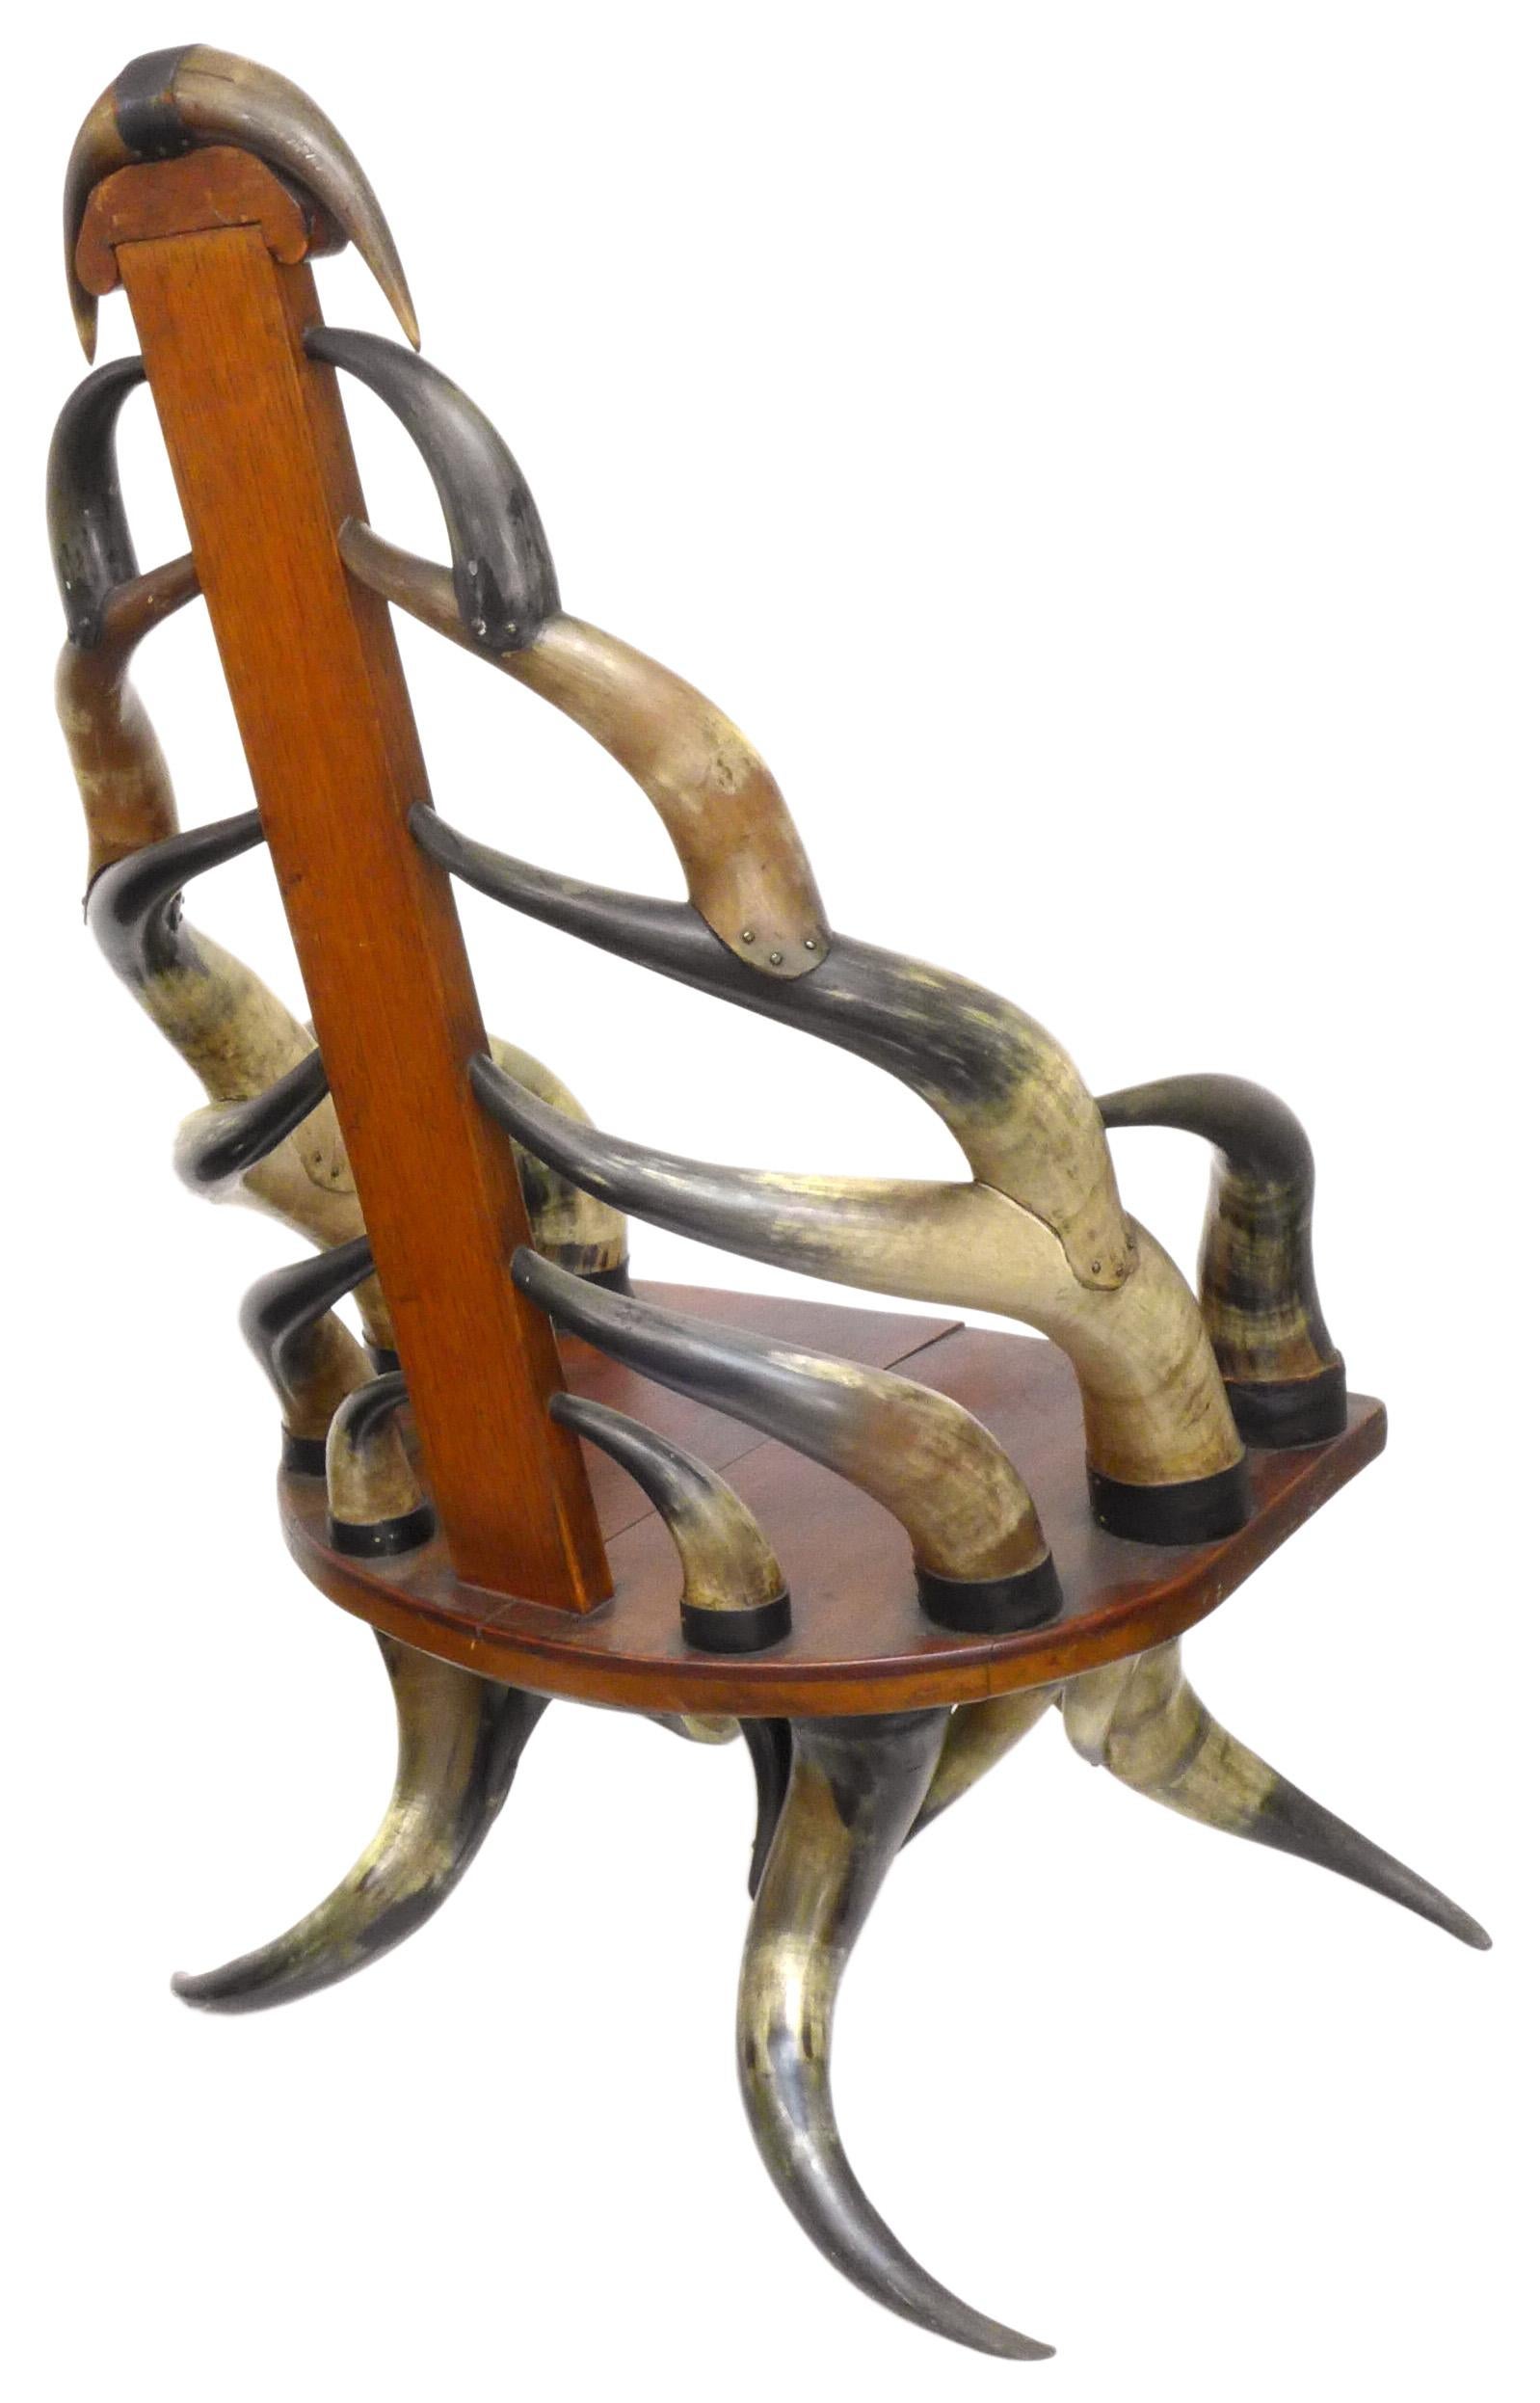 Turn of the Century American Steer Horn Parlor Chair 1